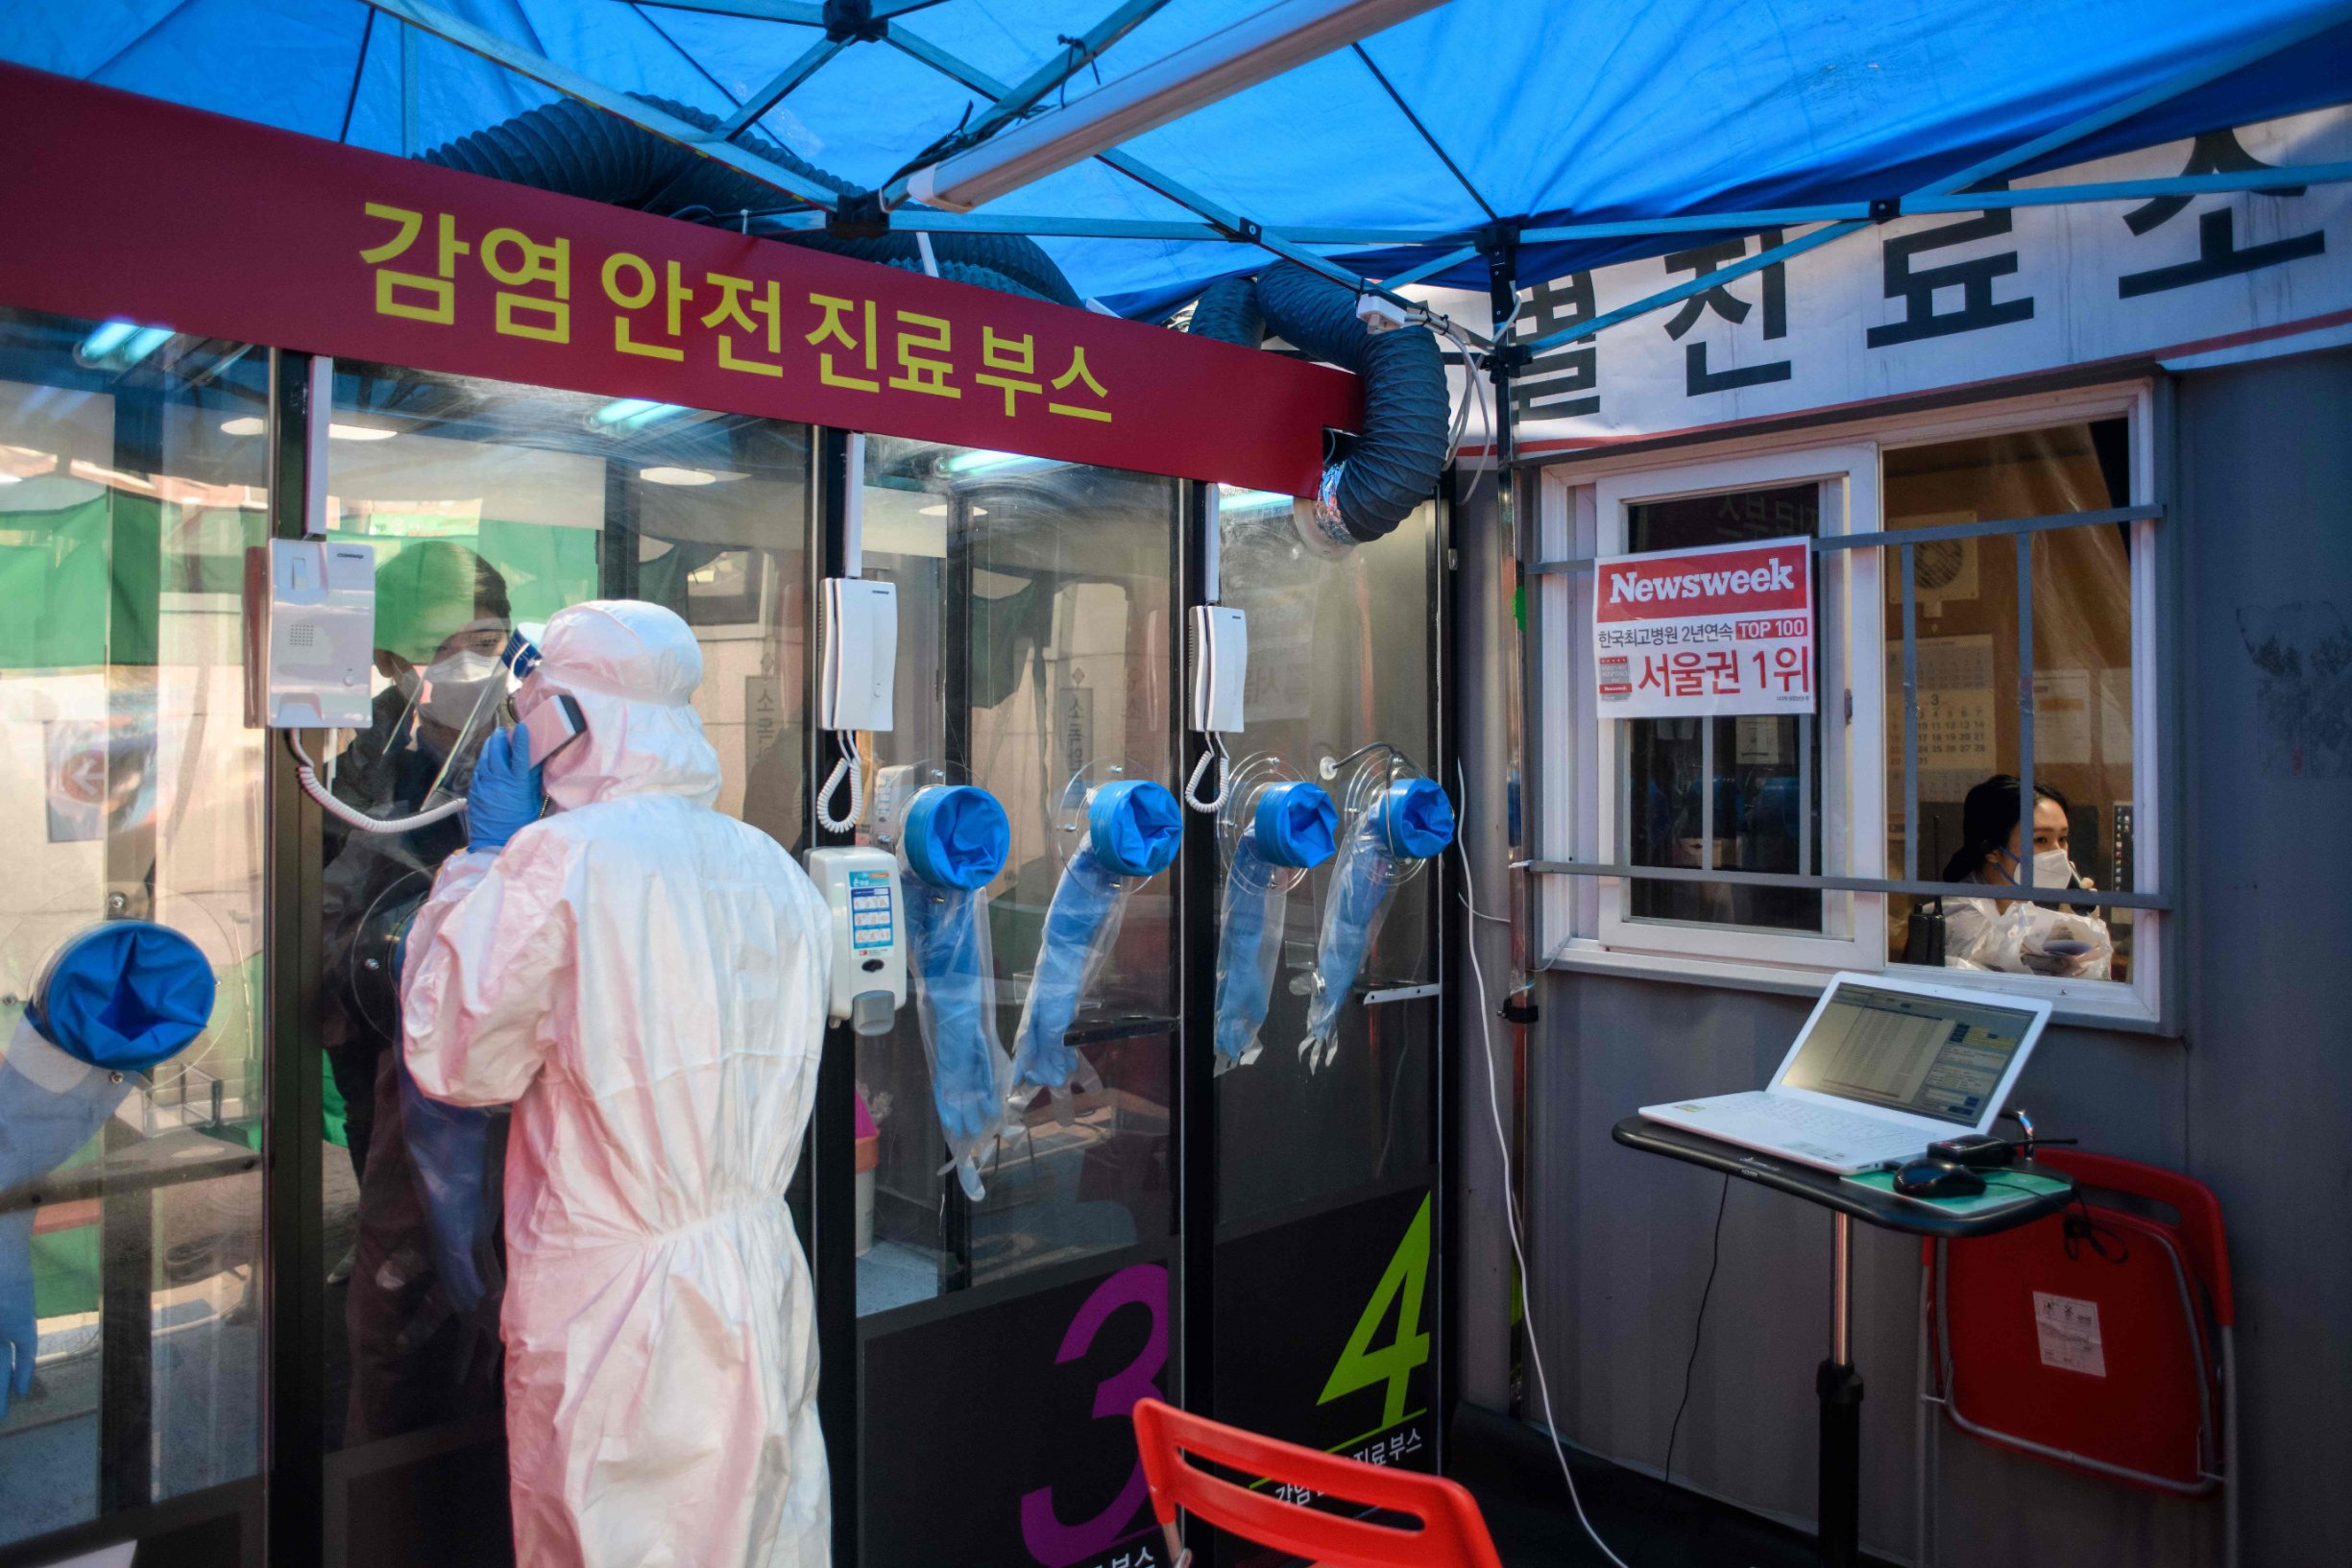 (FILES) In this file photo taken on March 17, 2020, a man speaks to a nurse during a COVID-19 novel coronavirus test at a testing booth outside Yangji hospital in Seoul. - As the coronavirus pandemic sparks global lockdowns, life has continued comparatively unhindered in places like Taiwan, South Korea and Hong Kong after their governments and citizens took decisive early action against the unfolding crisis. (Photo by Ed JONES / AFP)